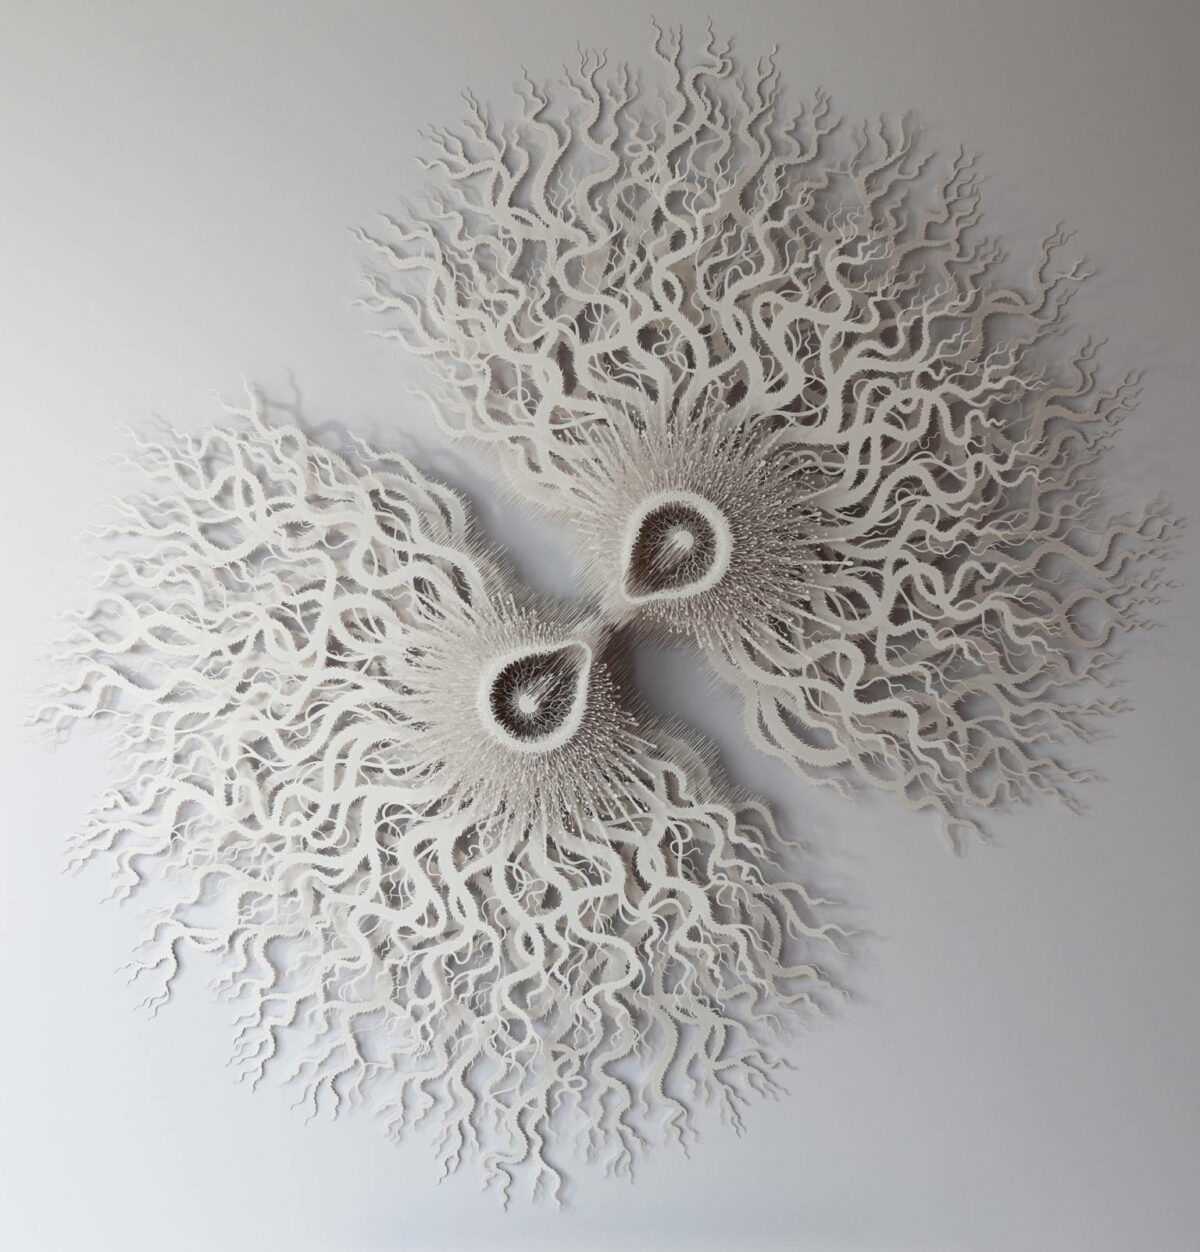 The Beautifully Intricate Paper Cut Sculptures Inspired By Corals And Microorganisms Of Rogan Brown 20